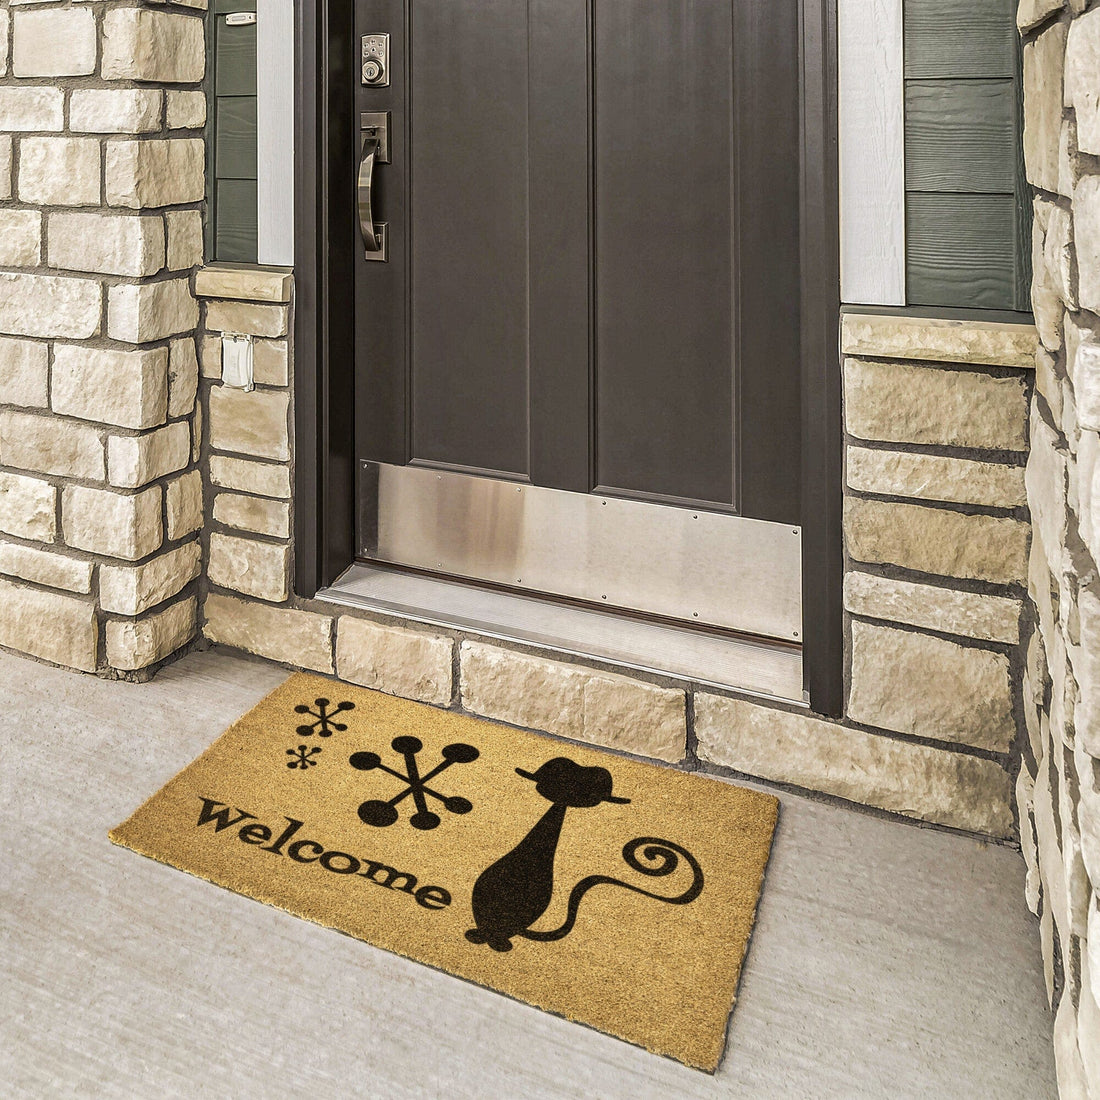 https://cdn.shopify.com/s/files/1/0521/9309/9931/products/atomic-living-welcome-mat-atomic-hipster-cat-mid-century-modern-outdoor-entry-mat-34189157793947.jpg?v=1669344817&width=1100